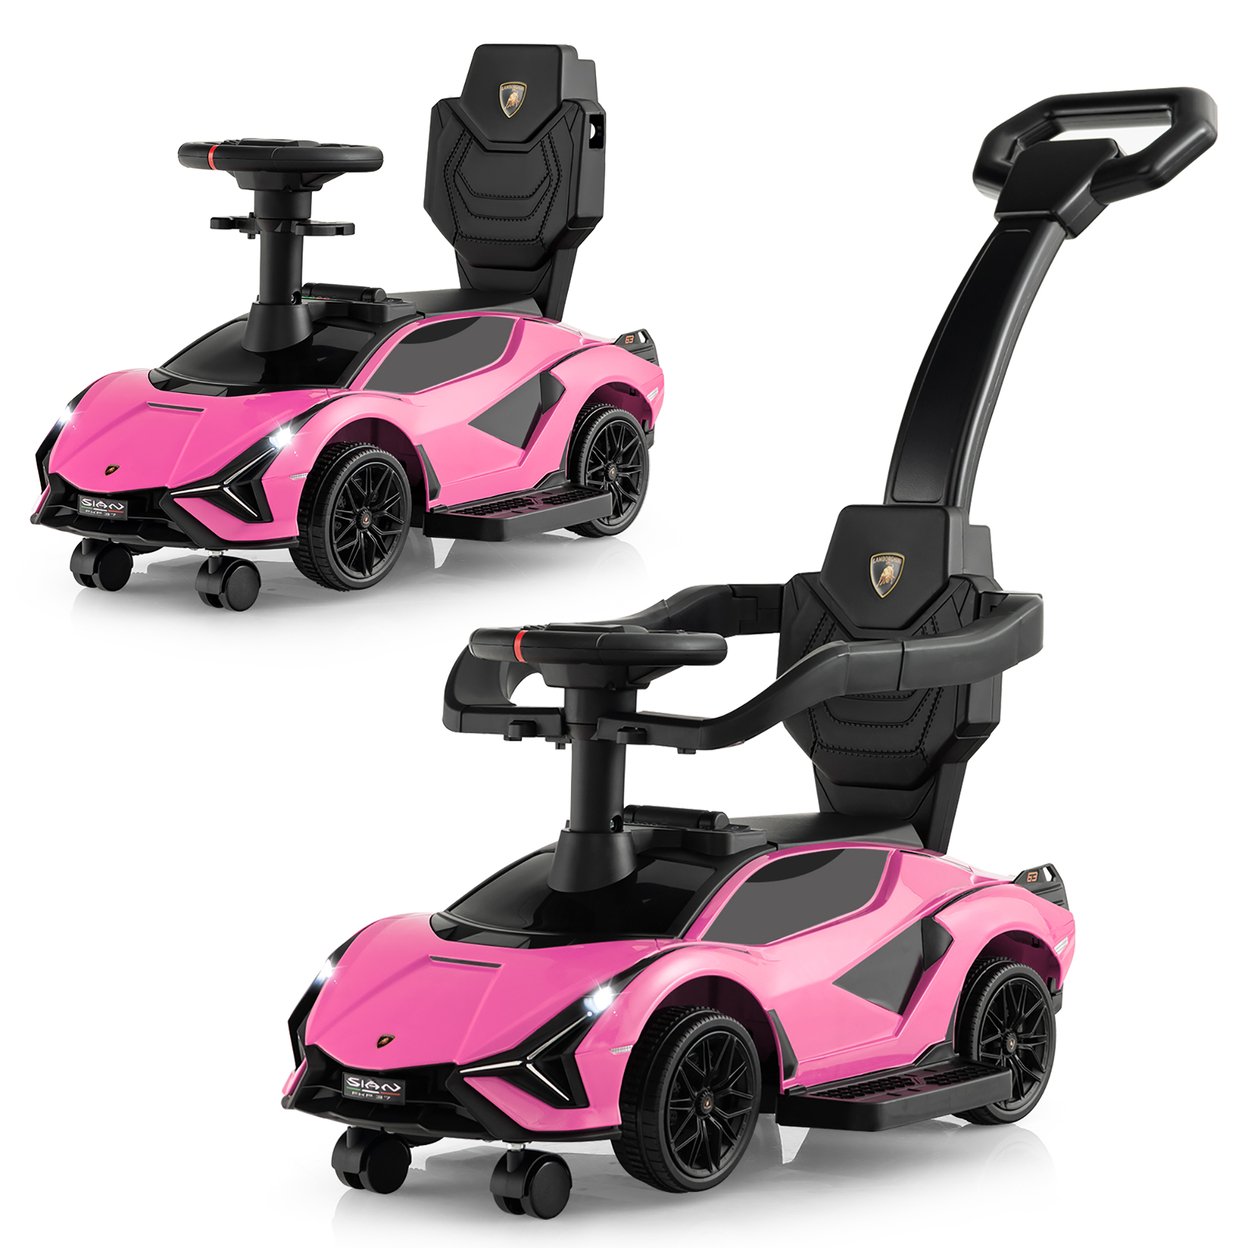 3-in-1 Licensed Lamborghini Ride On Push Car Walking Toy Stroller With USB Port - Pink